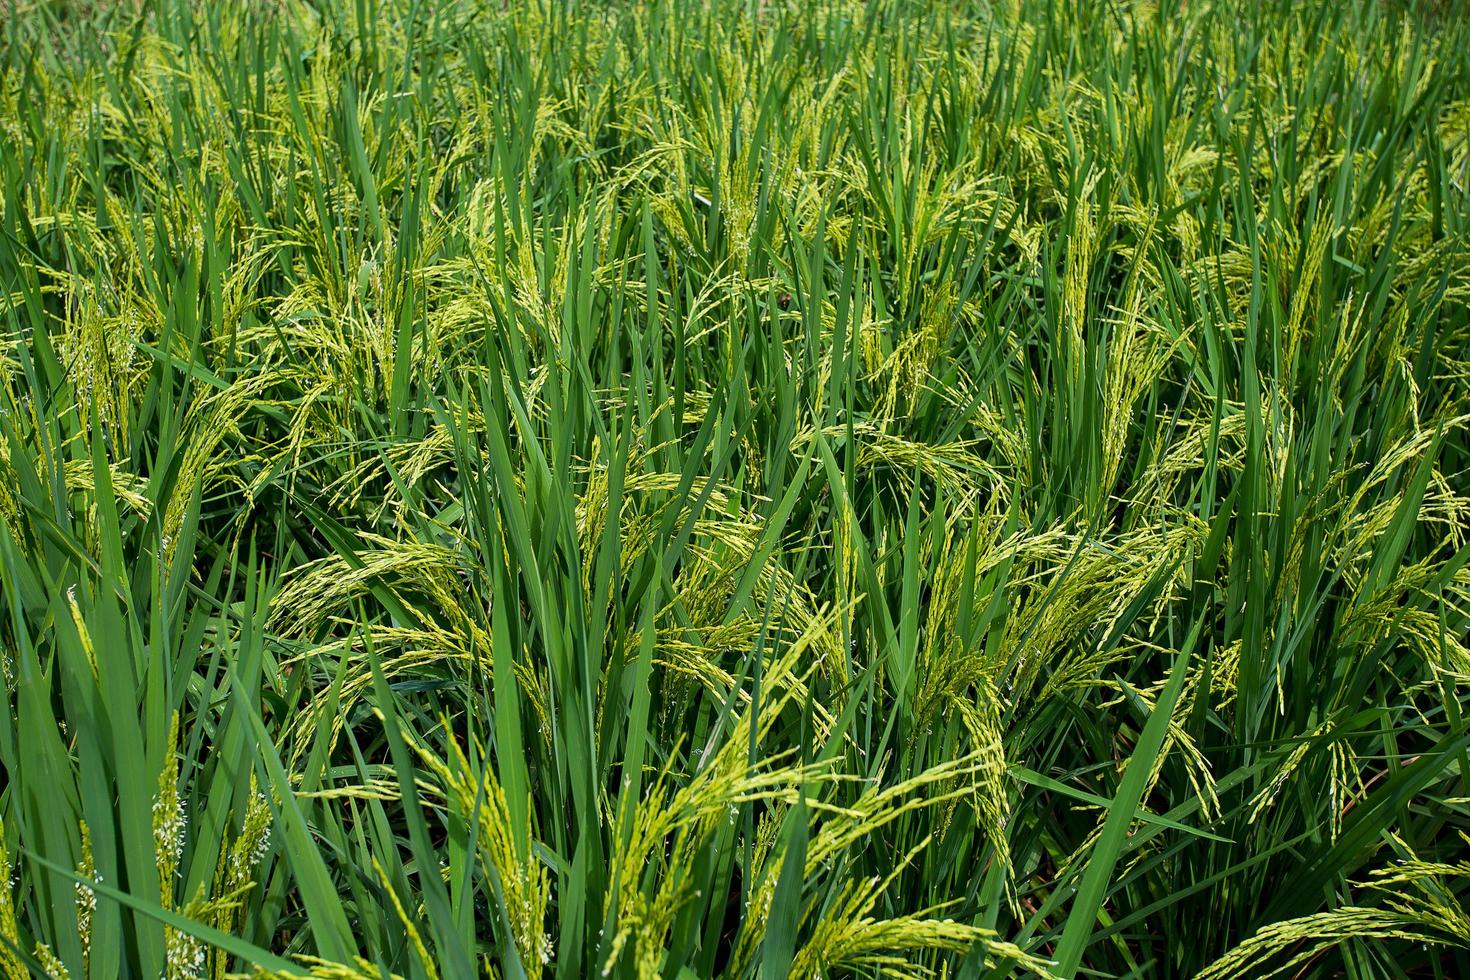 field of growing rice plants. green paddy. Cultivation of important crops of Thailand. photo